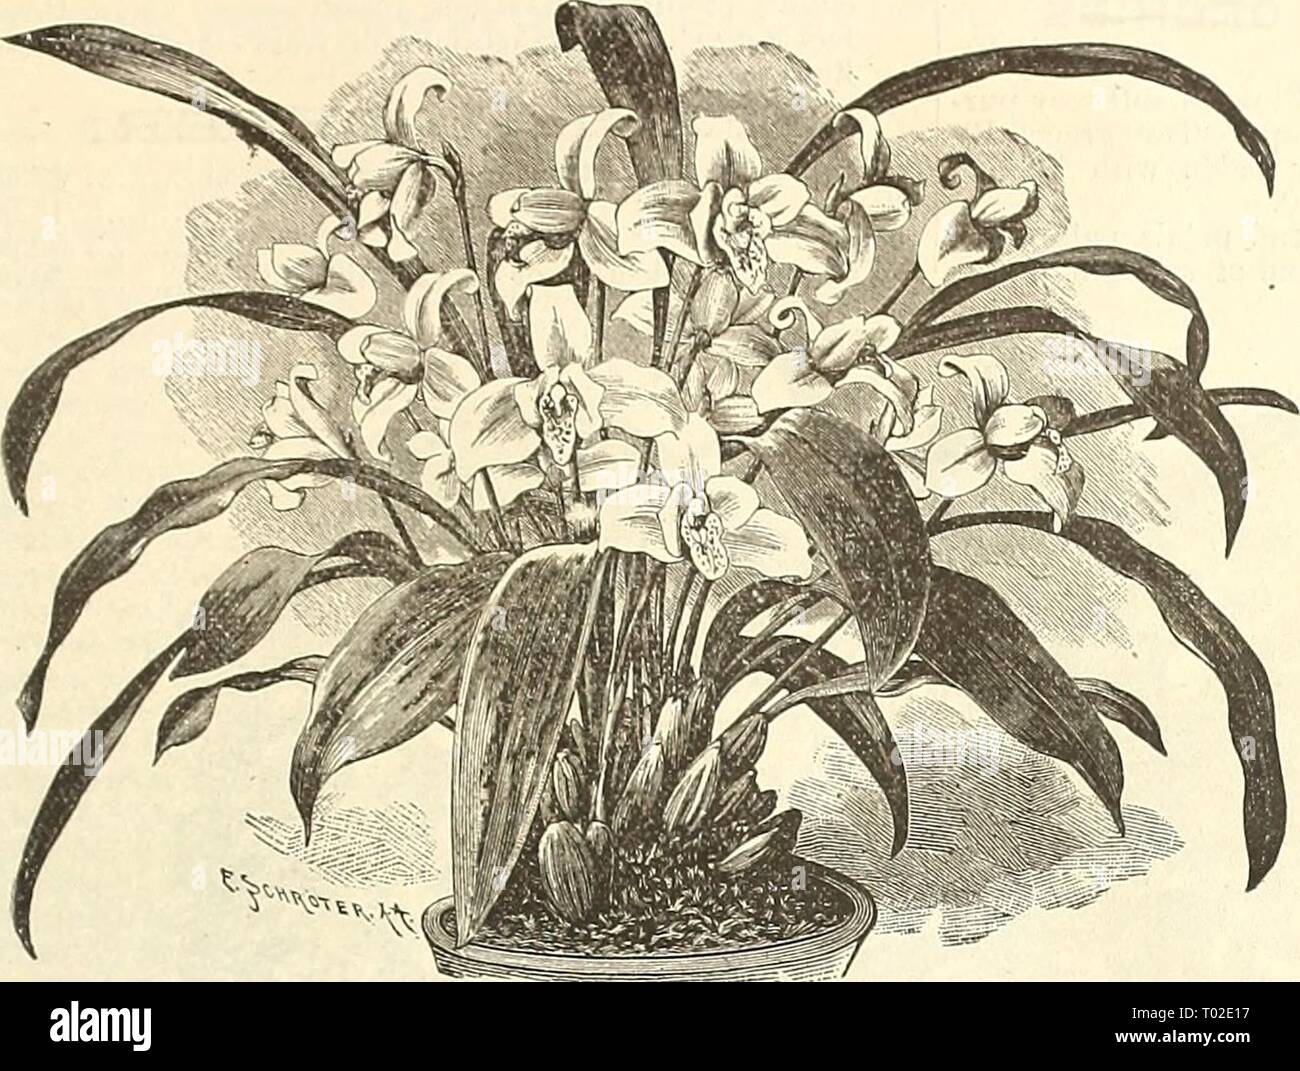 Dreer's garden calendar : 1891 . dreersgardencale1891henr Year: 1891  rOR GARDEN AND GREENHOUSE. m    Lycaste Skinneri. COOL GREENHOUSE ORCHIDS. Continued. liSelia Autumiialis, A lovely and showy Orchid. It produces on spikes its blooms of from six to nine ; the sepals and petals are of a beautiful purple color; lip rose and white, with yellow in the centre; the flowers are four inches across; December and January. $1.50 to 83.00. Xiselia Autumiialis Atrorubens. Flowers rich red- dish or magenta purple, deepest towards the tips of the sepals and petals, especially so on the upper part, while t Stock Photo